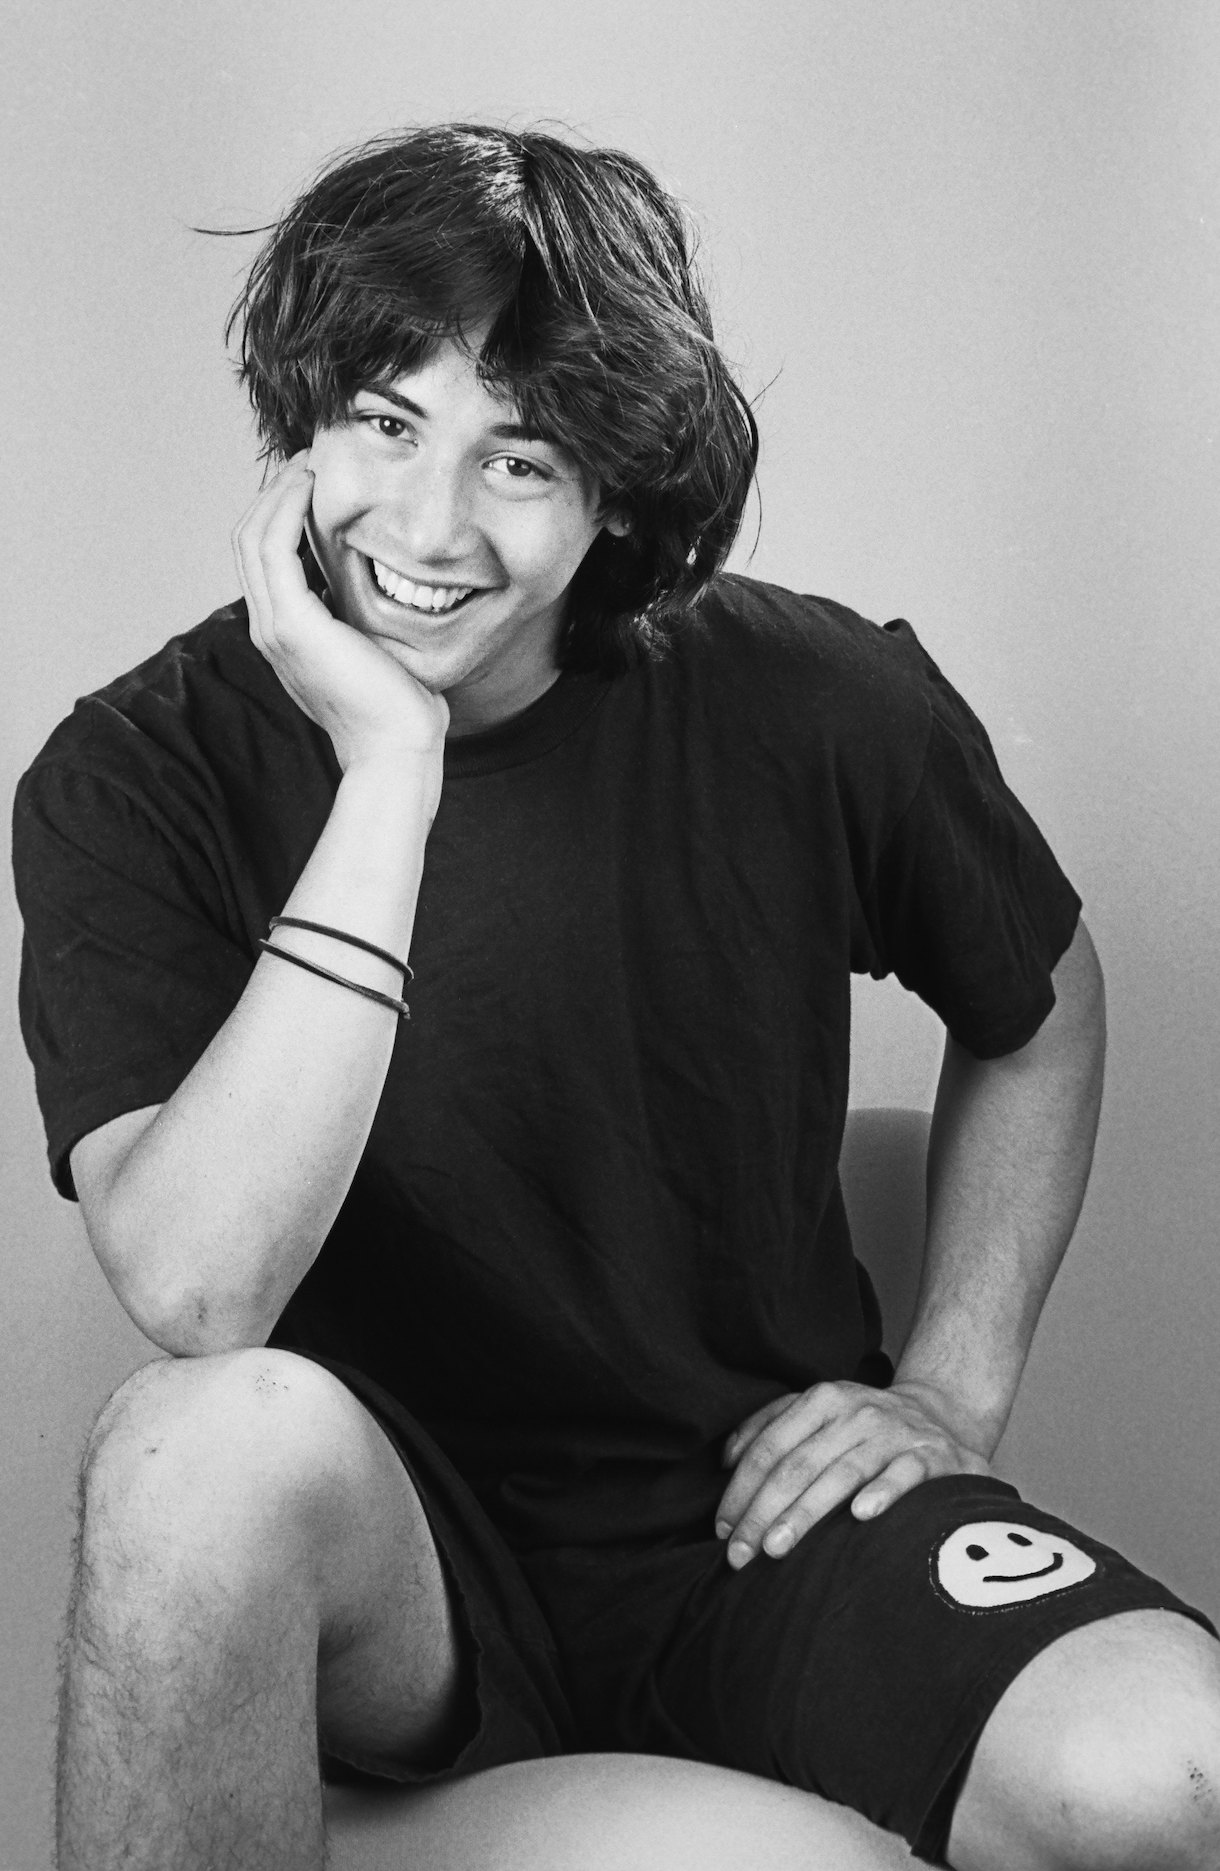 1987: A young Keanu Reeves, star of 'Bill & Ted's Excellent Adventure'